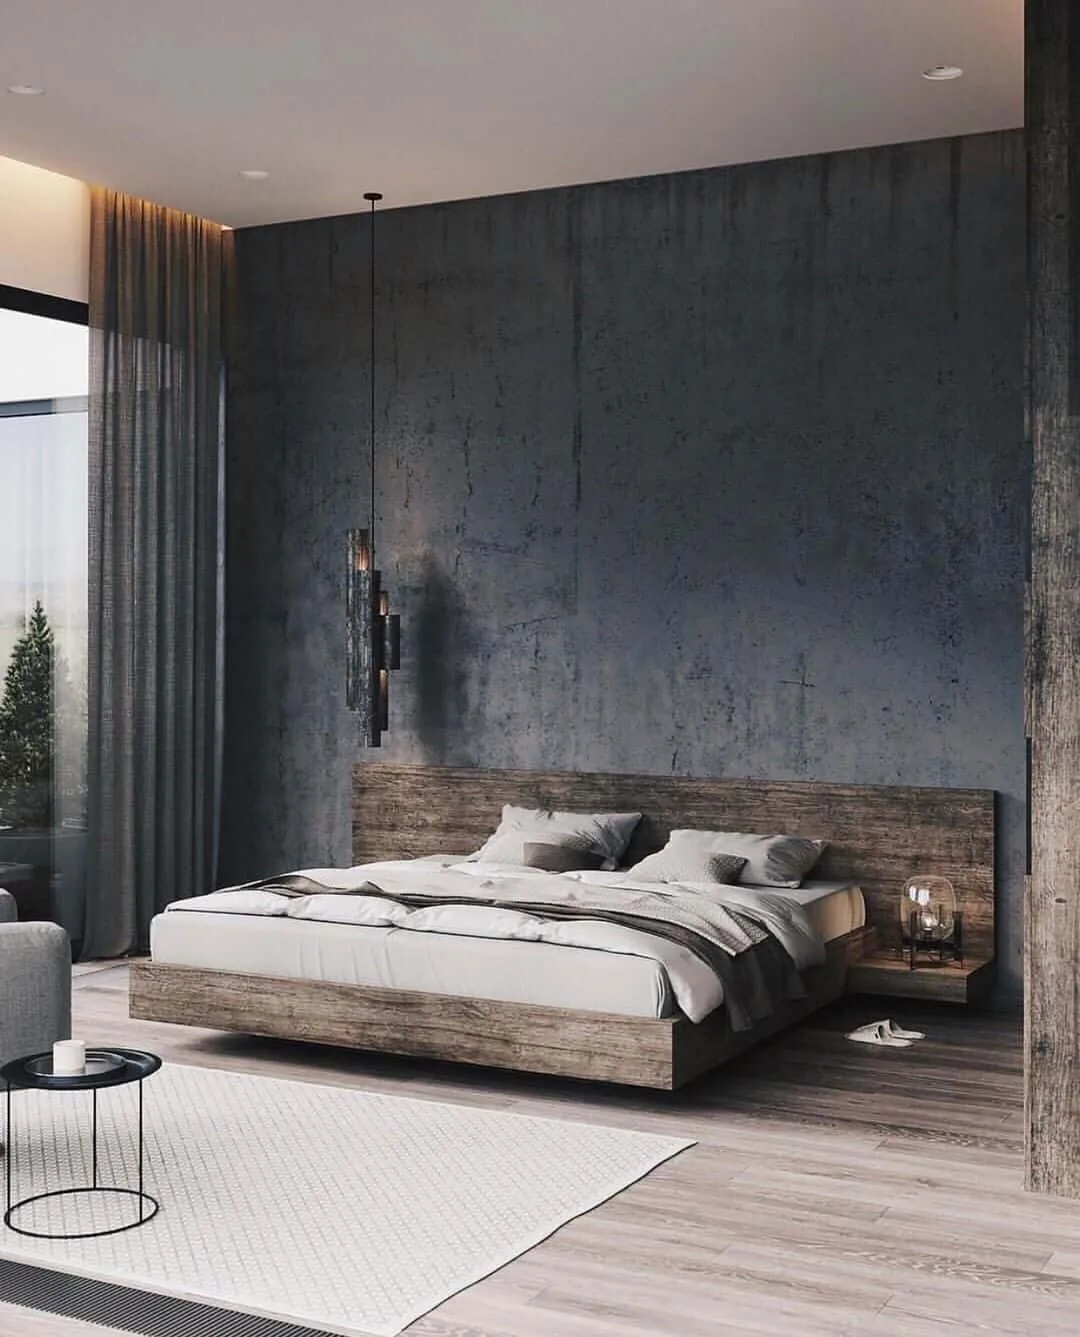 This bedroom design combines the masculine ruggedness of dark colors and pairs it with beautiful texture rich walls and furniture